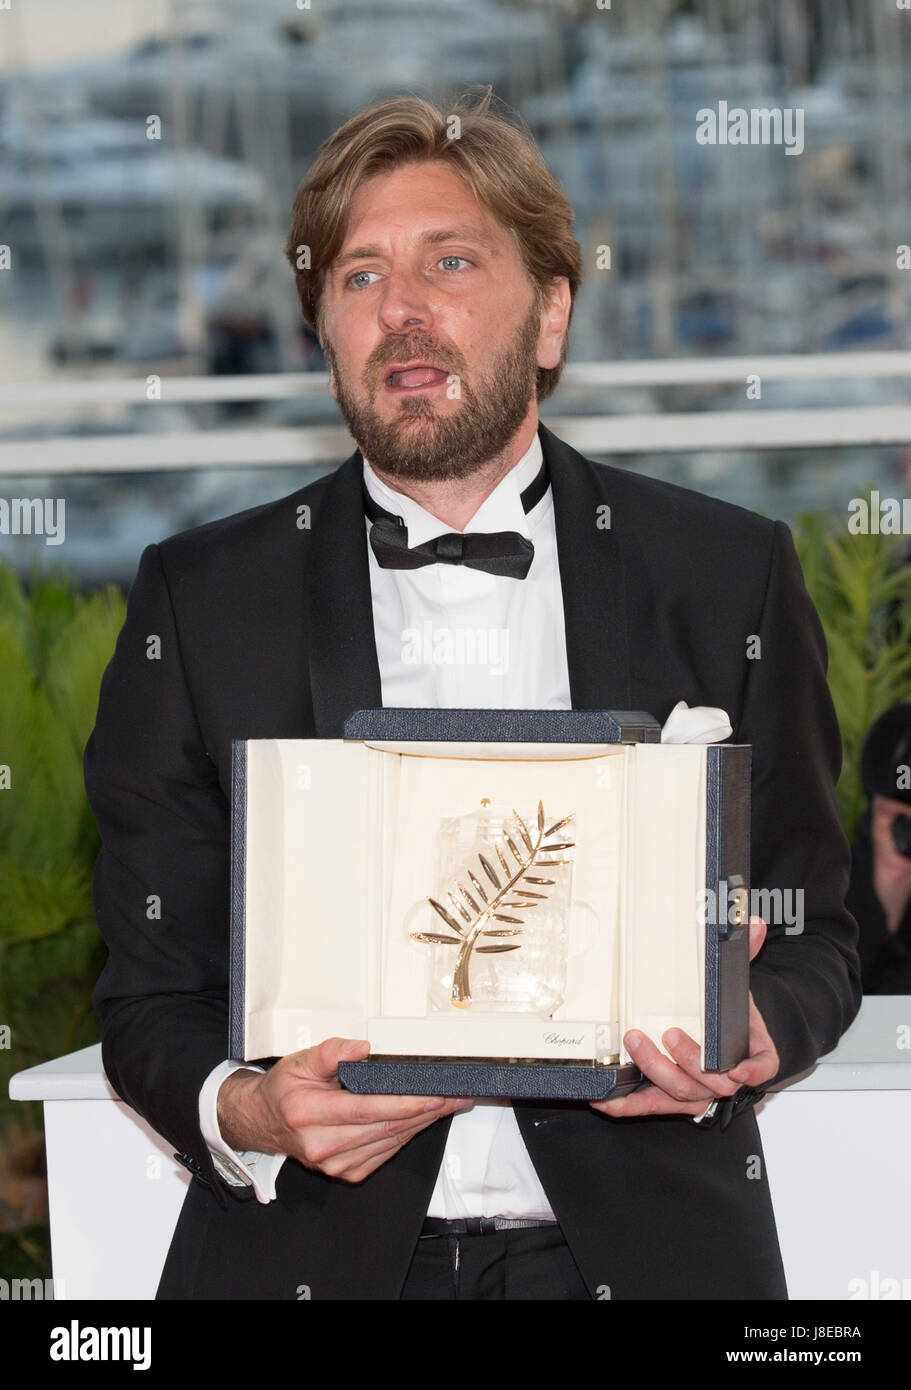 Cannes, France. 28th May, 2017. Swedish director Ruben Ostlund poses with his trophy during a photocall at the 70th Cannes Film Festival in Cannes, France, May 28, 2017. Film 'The Square', directed by Ruben Ostlund, won the Palme d'Or of the 70th Cannes Film Festival. Credit: Xu Jinquan/Xinhua/Alamy Live News Stock Photo